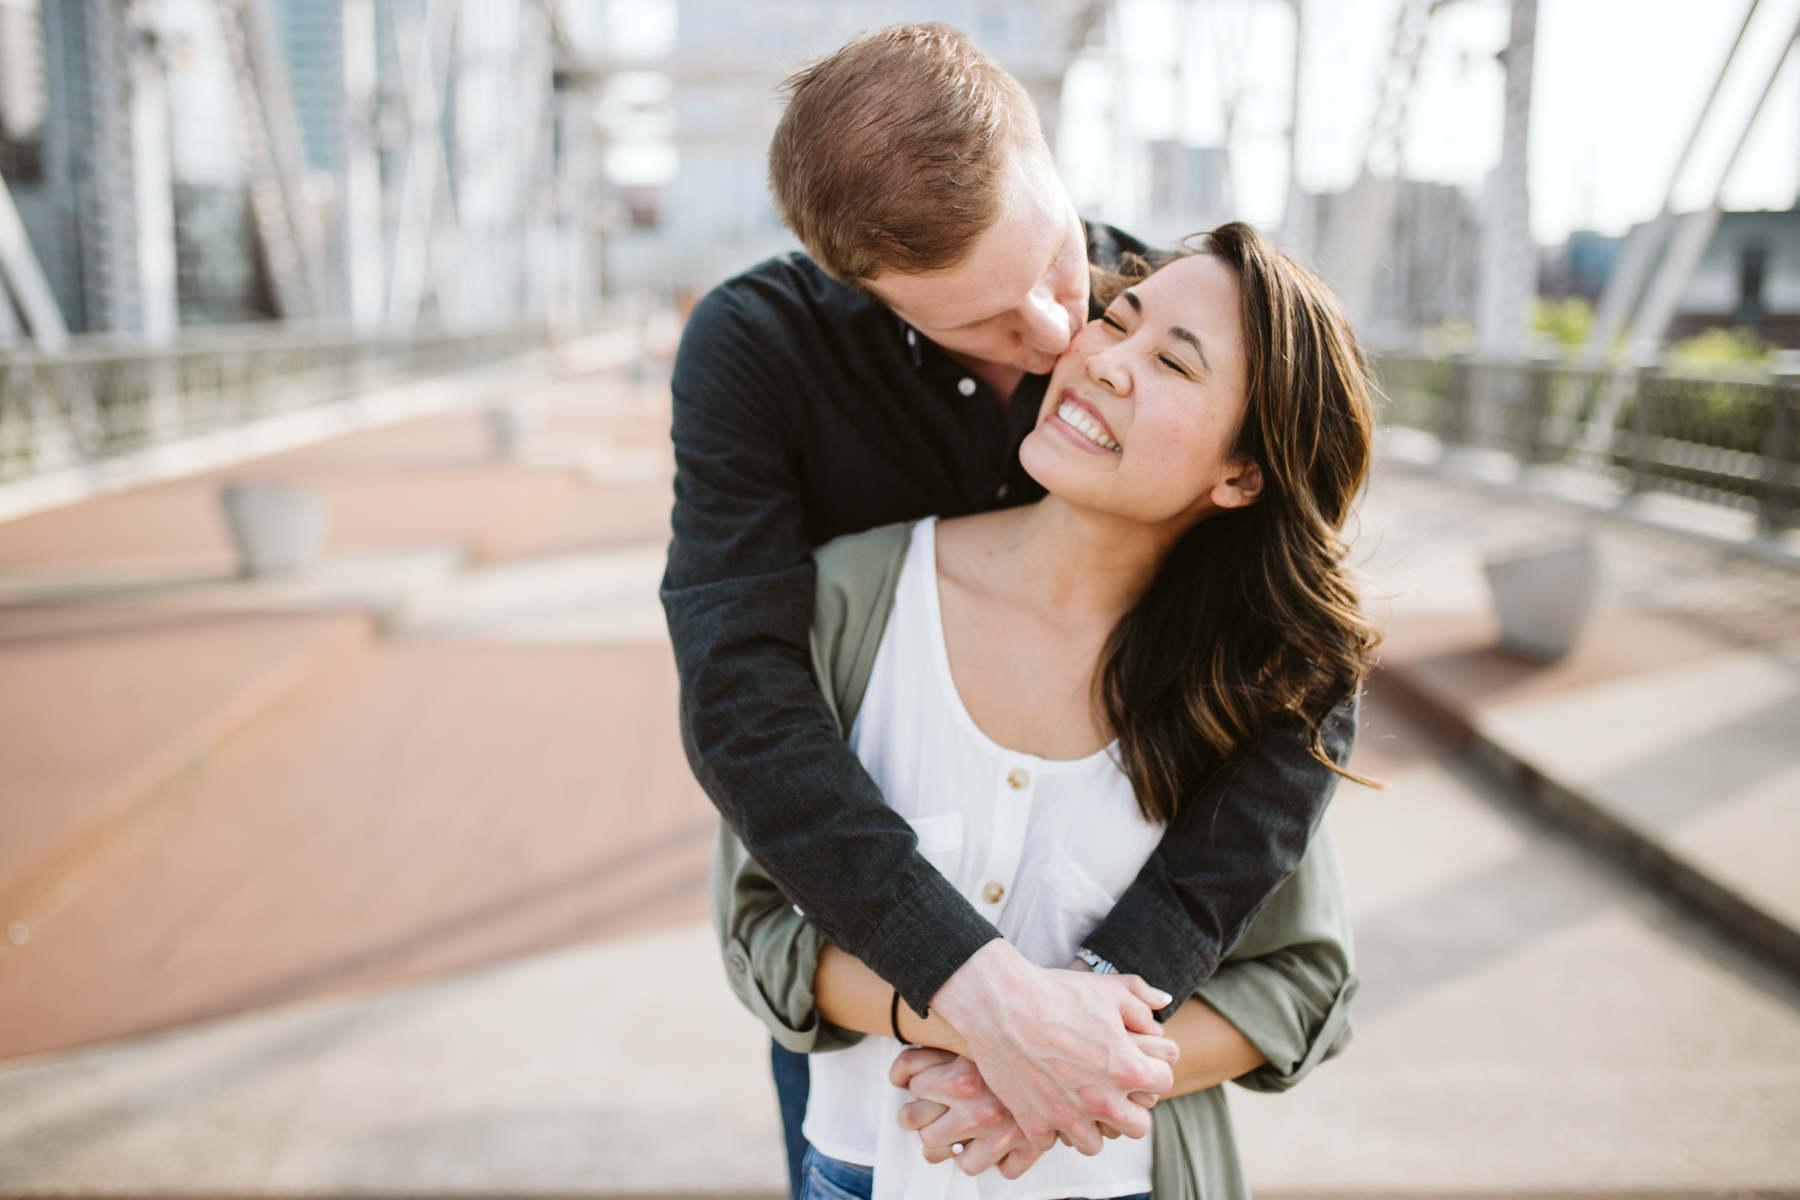 Sunny engagement session on the pedestrian bridge in downtown Nashville, Tennessee